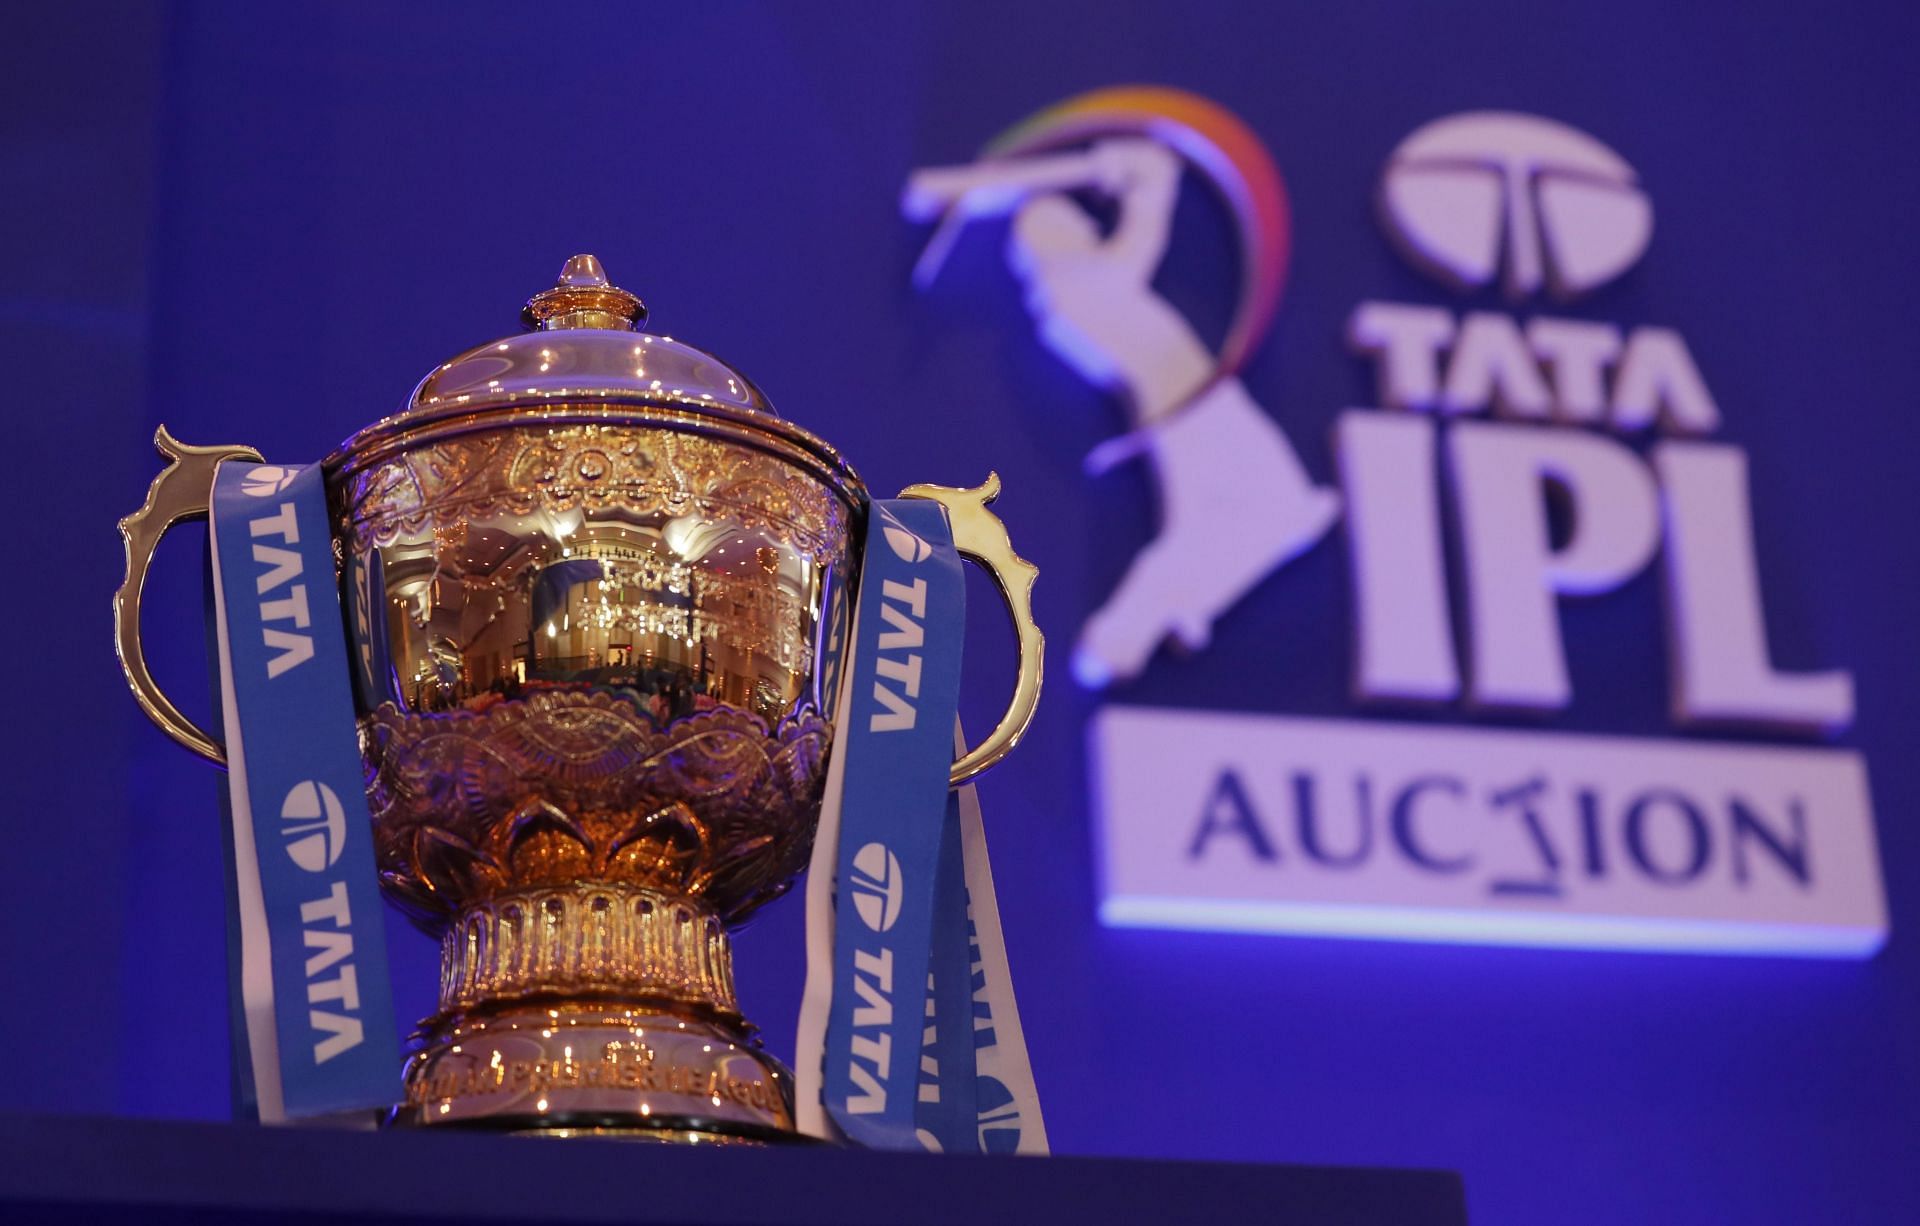 The IPL Auction is finally here! (Image credits - IPLT20)